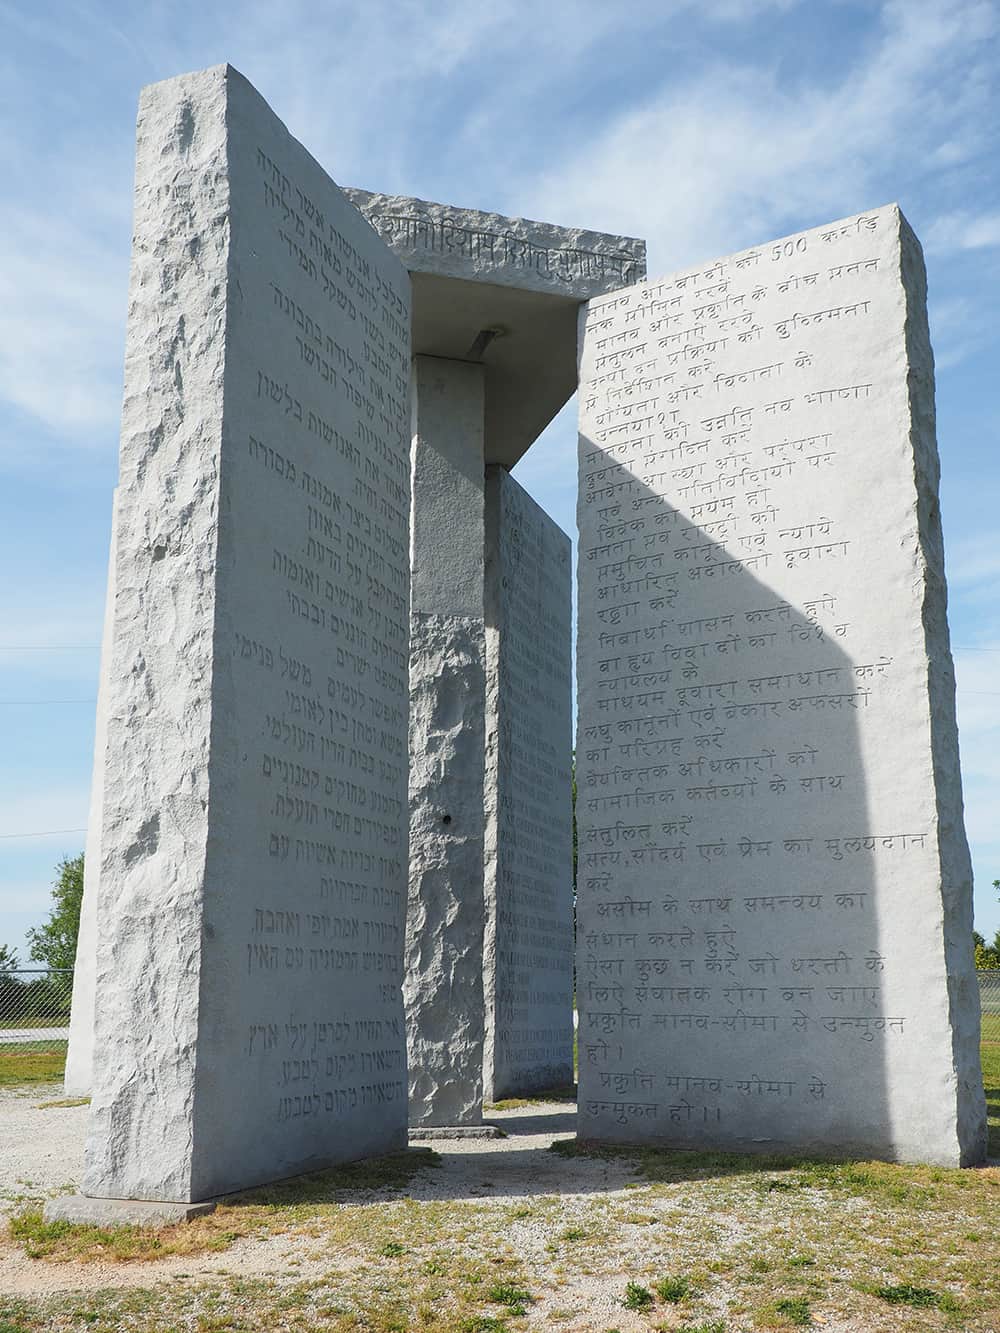 the Guidestones facts and conspiracy — Autumn all along